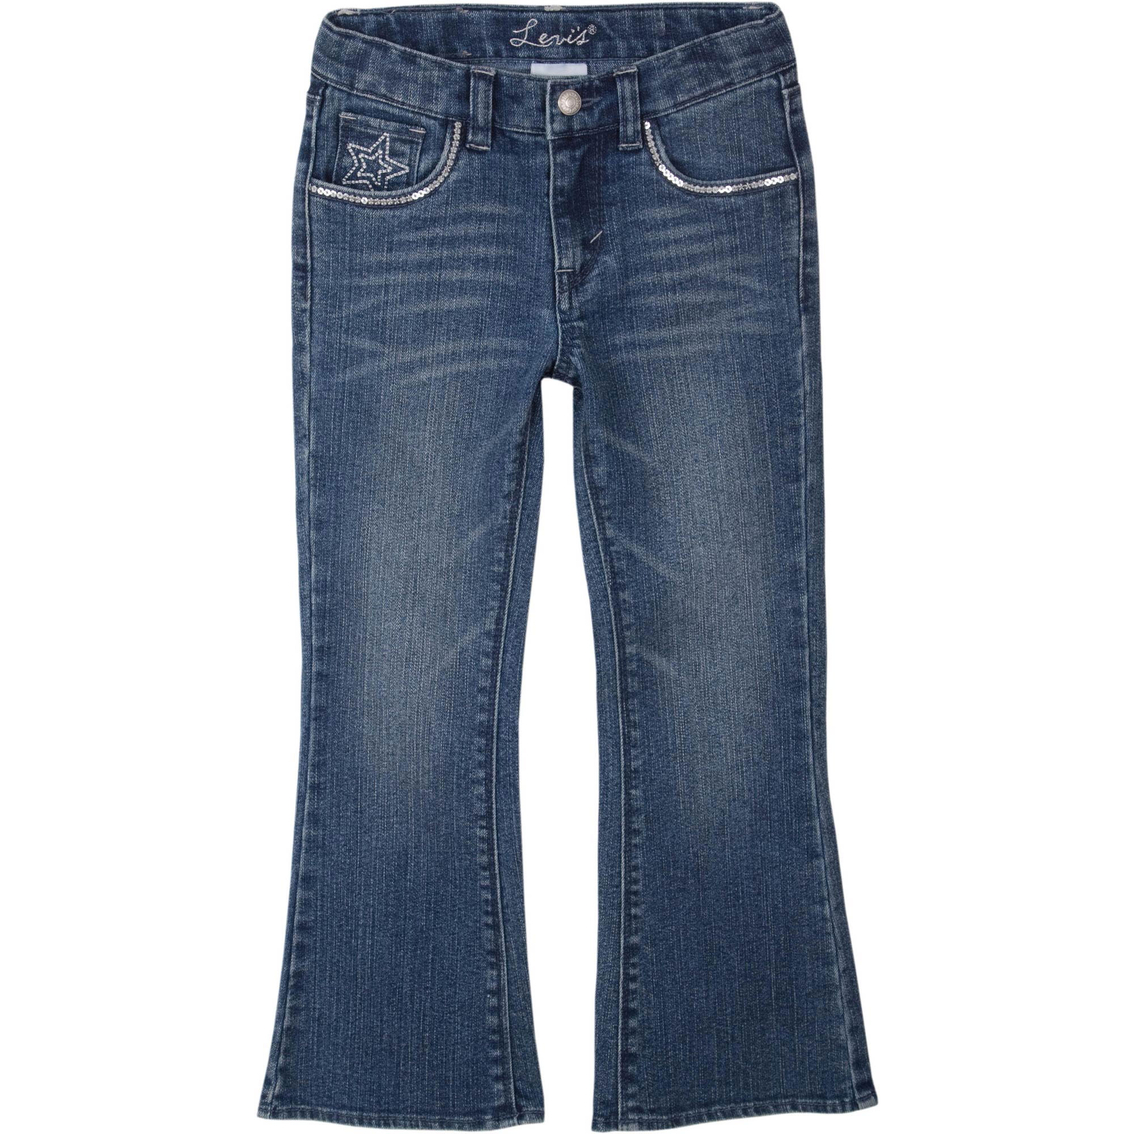 Levi's Toddler/little Girls Claudia Flare Jeans | Toddler Girls 2t-5t ...